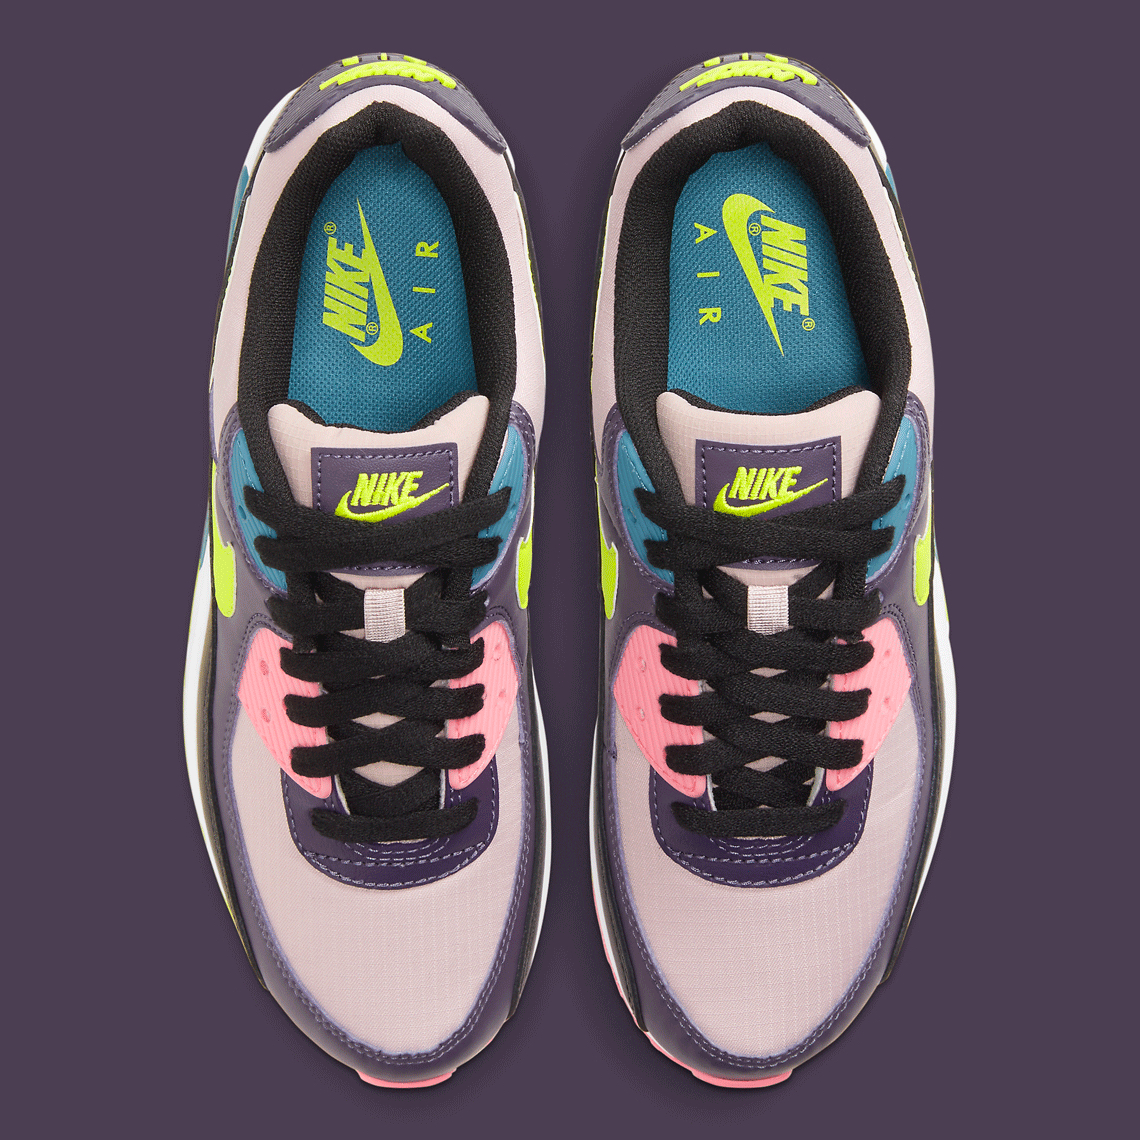 The Nike Air Max 90 Appears With High-Vis Accents | LaptrinhX / News